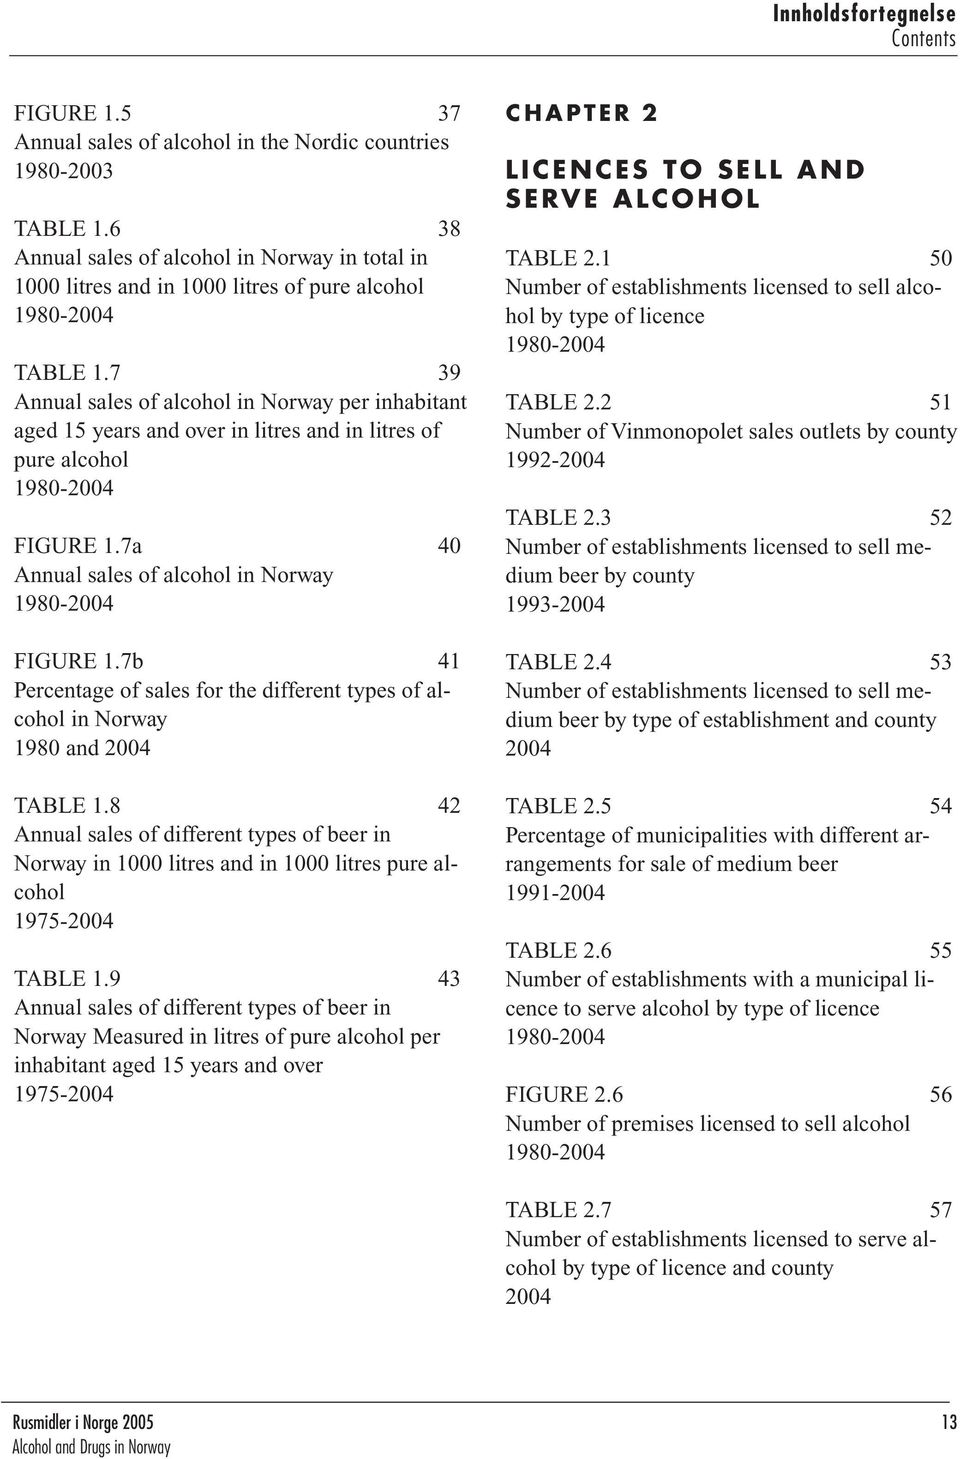 7 39 Annual sales of alcohol in Norway per inhabitant aged 15 years and over in litres and in litres of pure alcohol 1980-2004 FIGURE 1.7a 40 Annual sales of alcohol in Norway 1980-2004 FIGURE 1.